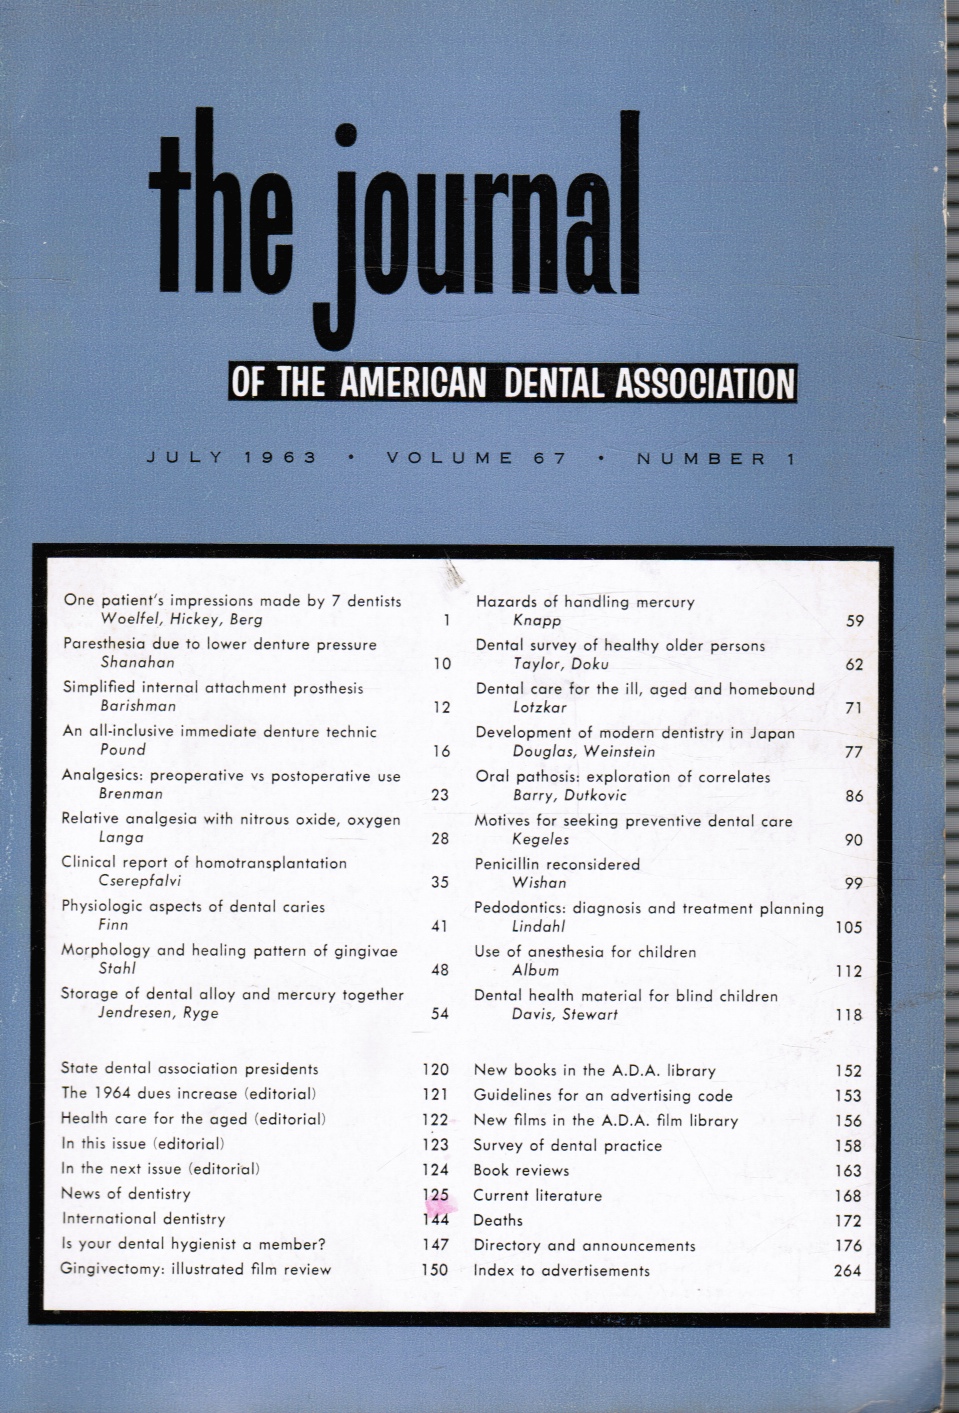 AMERICAN DENTAL ASSOCIATION - The Journal of the American Dental Association: July 1963 Jada